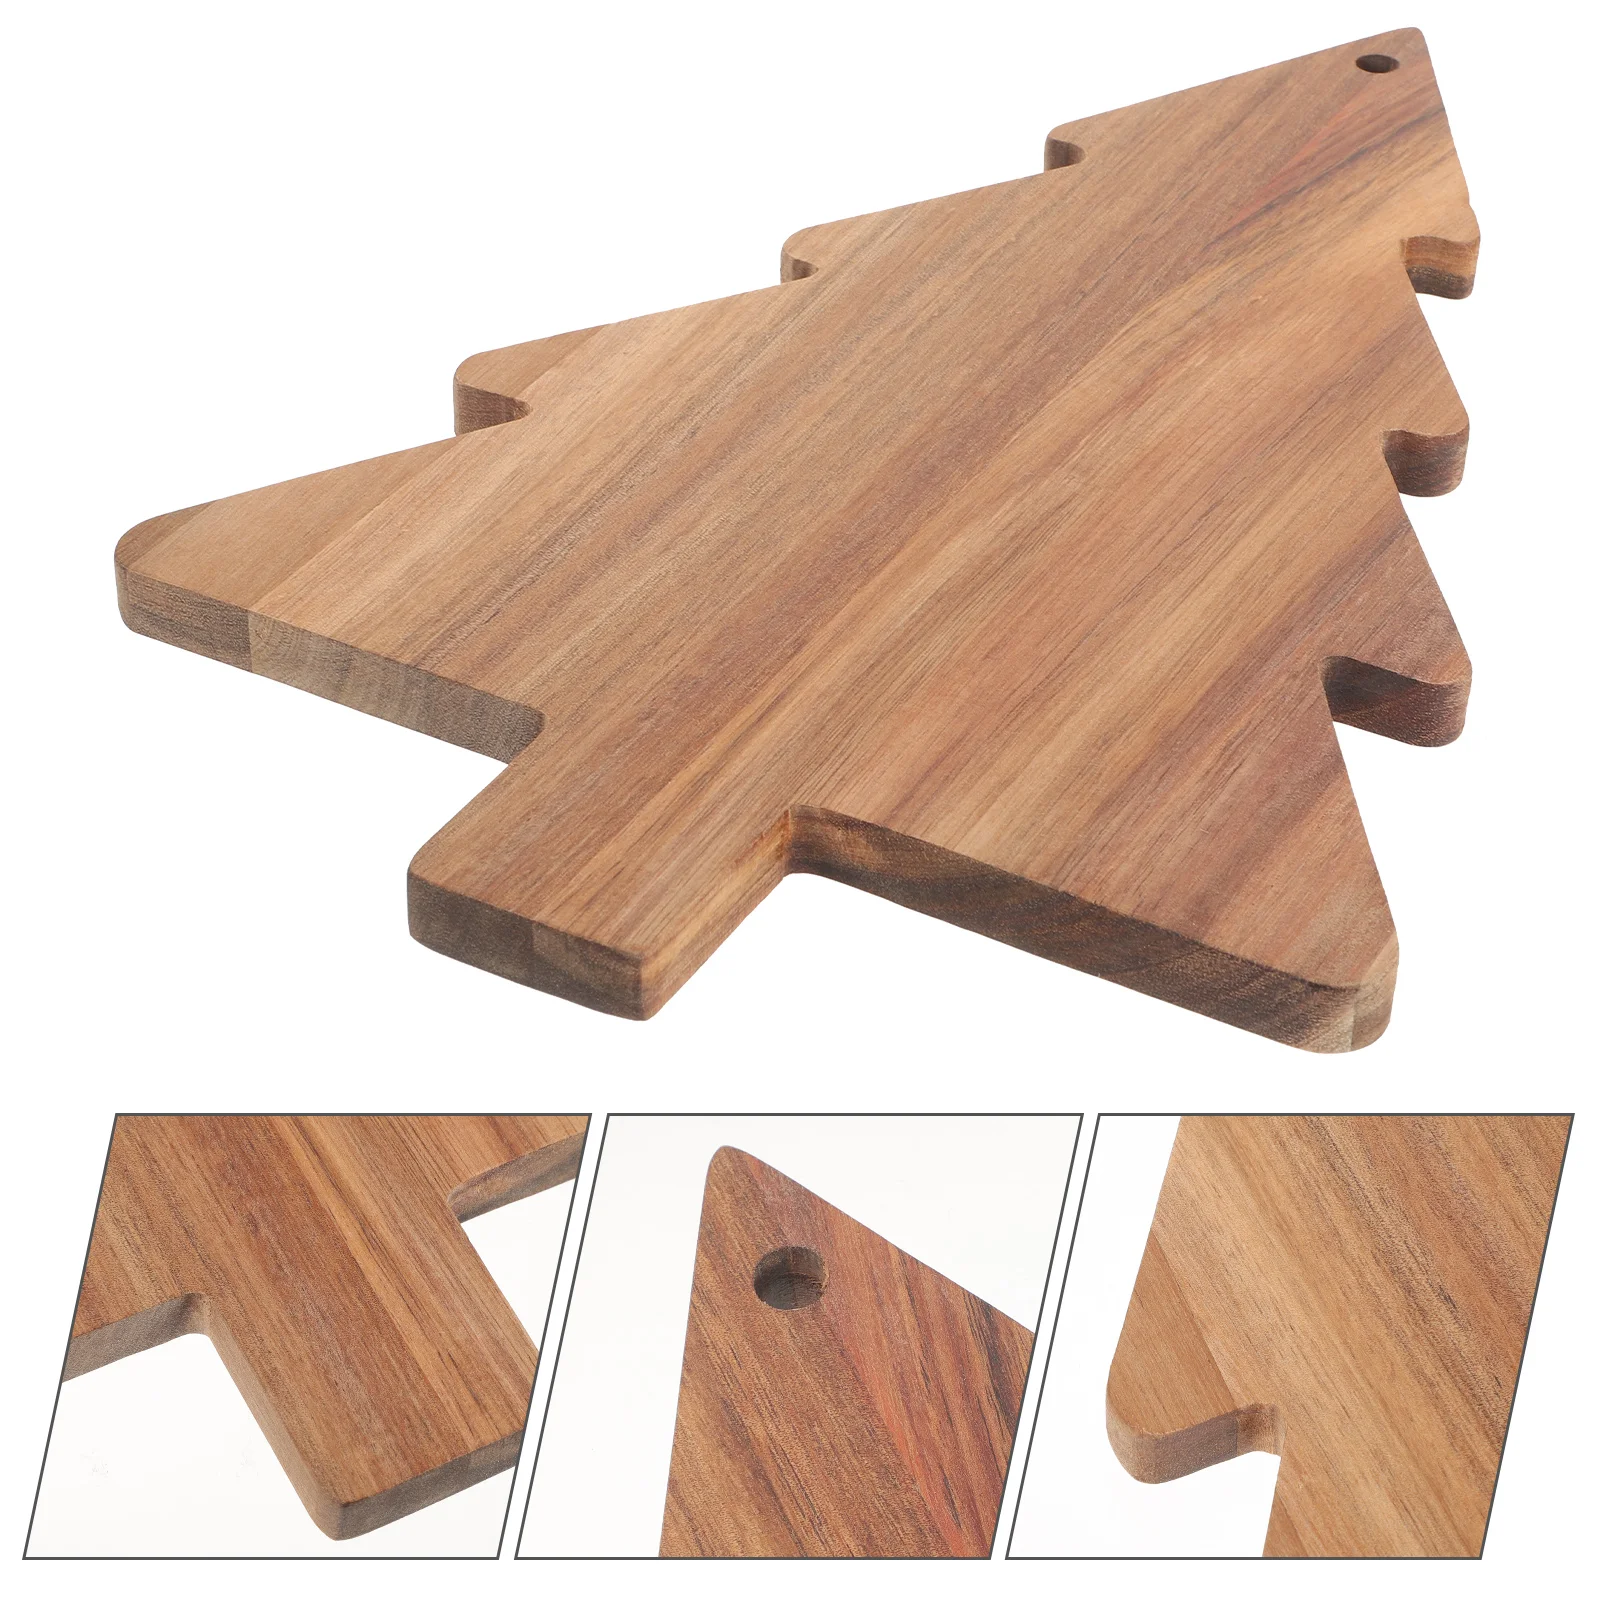 

Chopping Board Kitchen Wooden Plate Cute Cutting Boards Pizza Tray Serving Dessert Christmas Tree Shaped Charcuterie